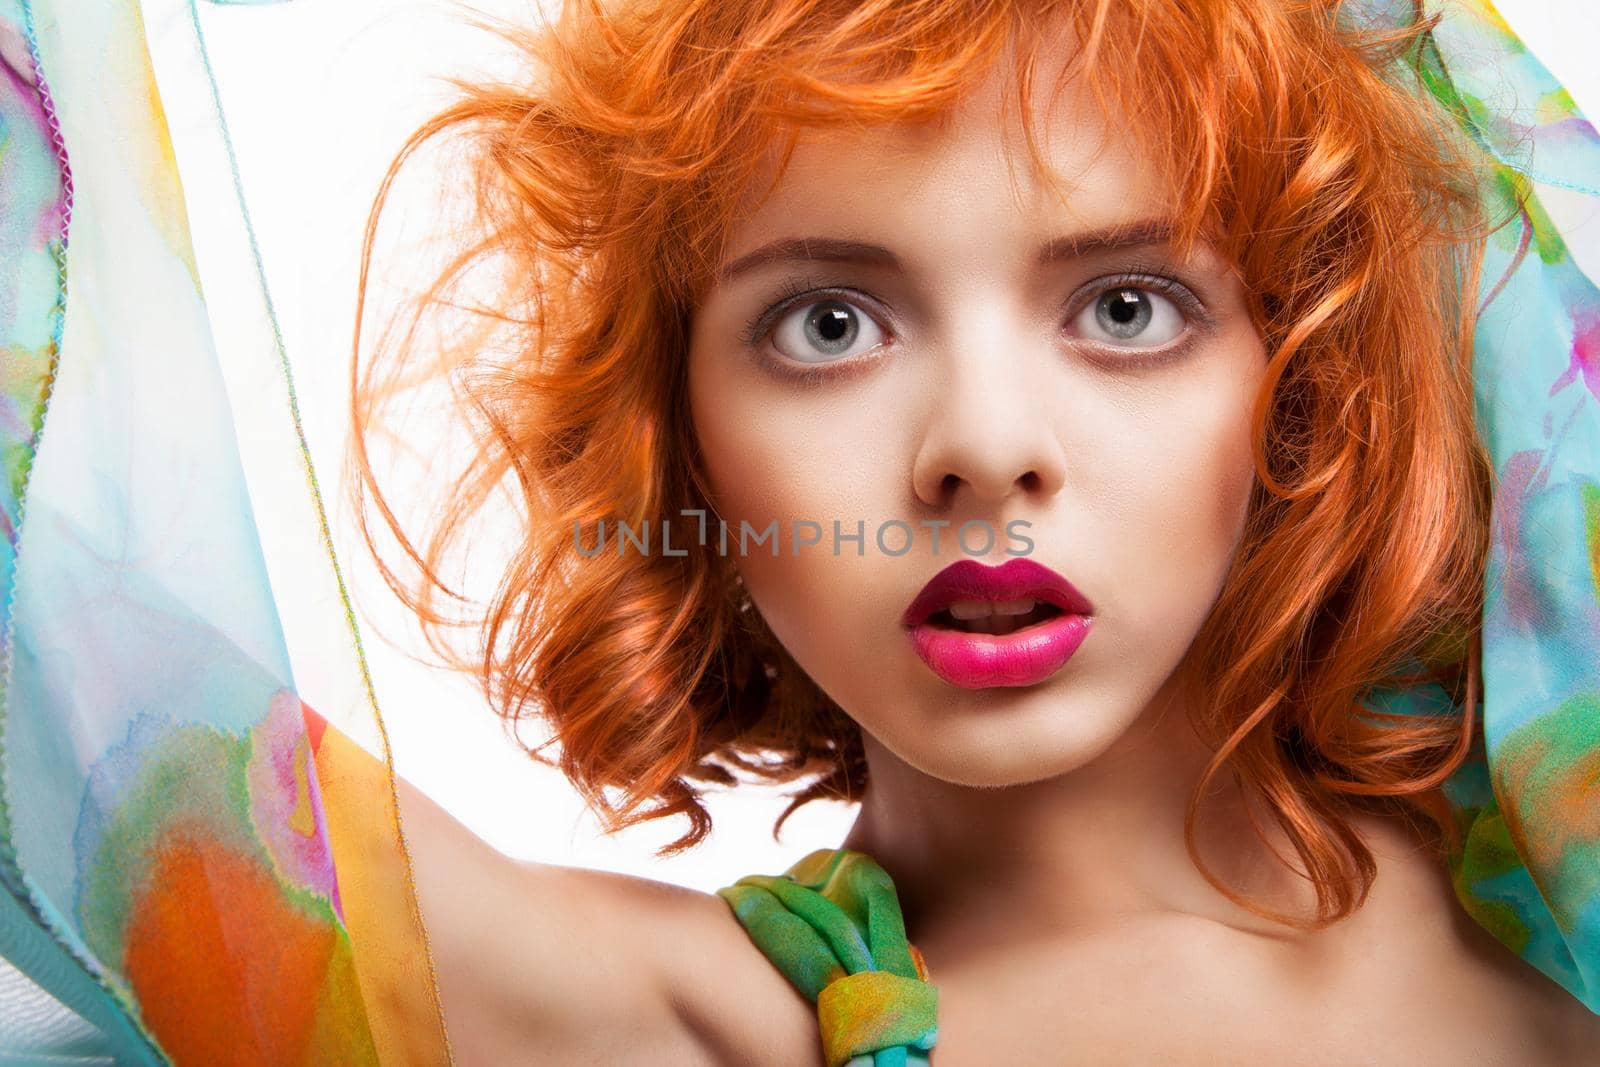 Girl with beautiful red hair and colorful dress and fabric over white background